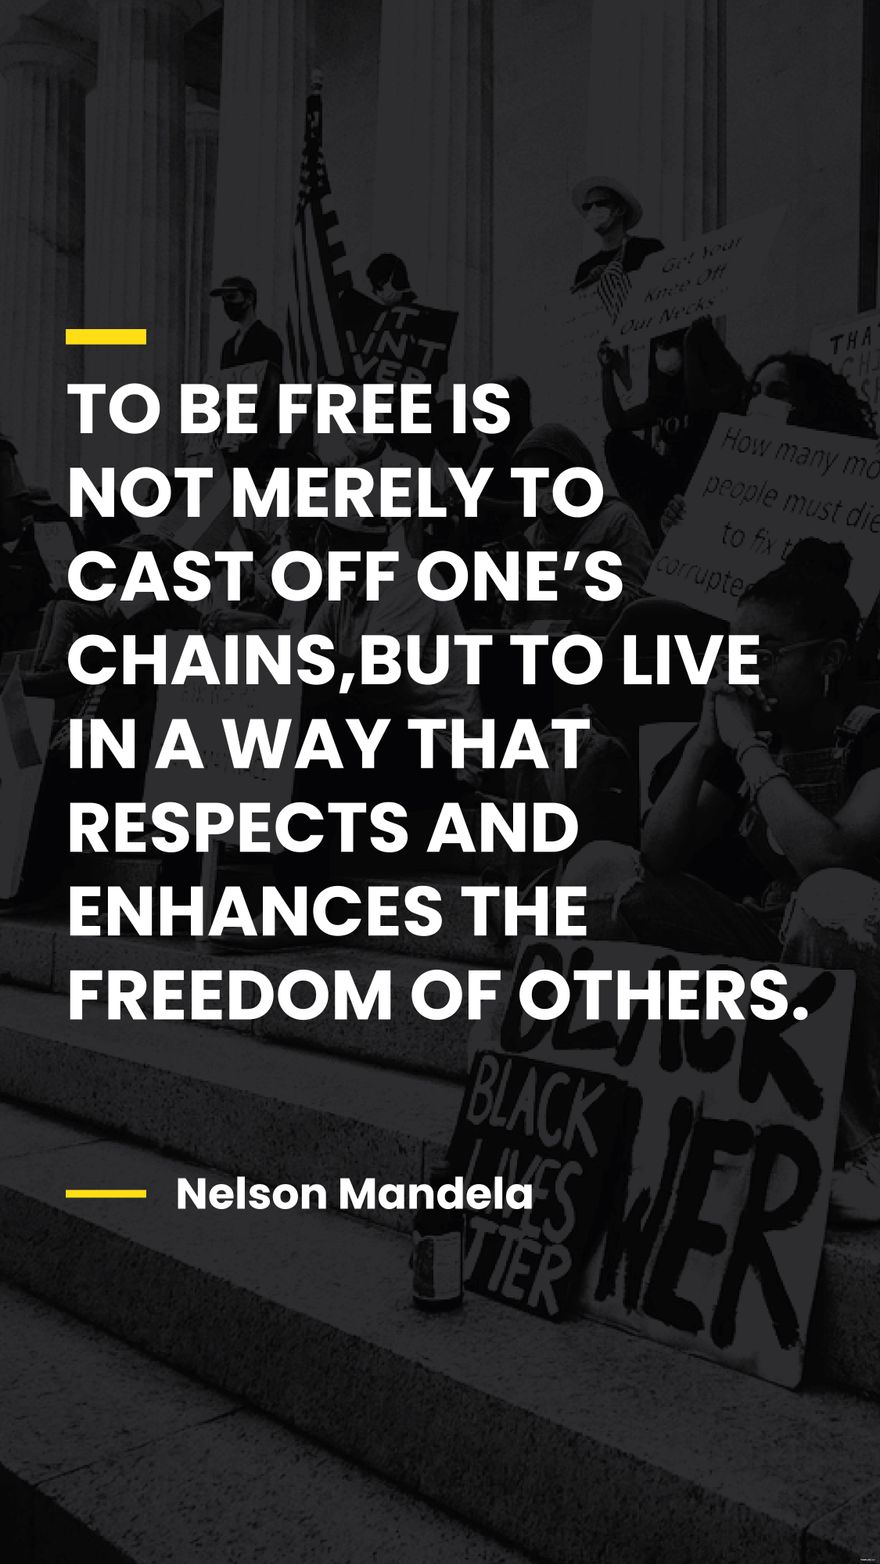 Nelson Mandela - To be is not merely to cast off one’s chains, but to live in a way that respects and enhances the freedom of others. in JPG